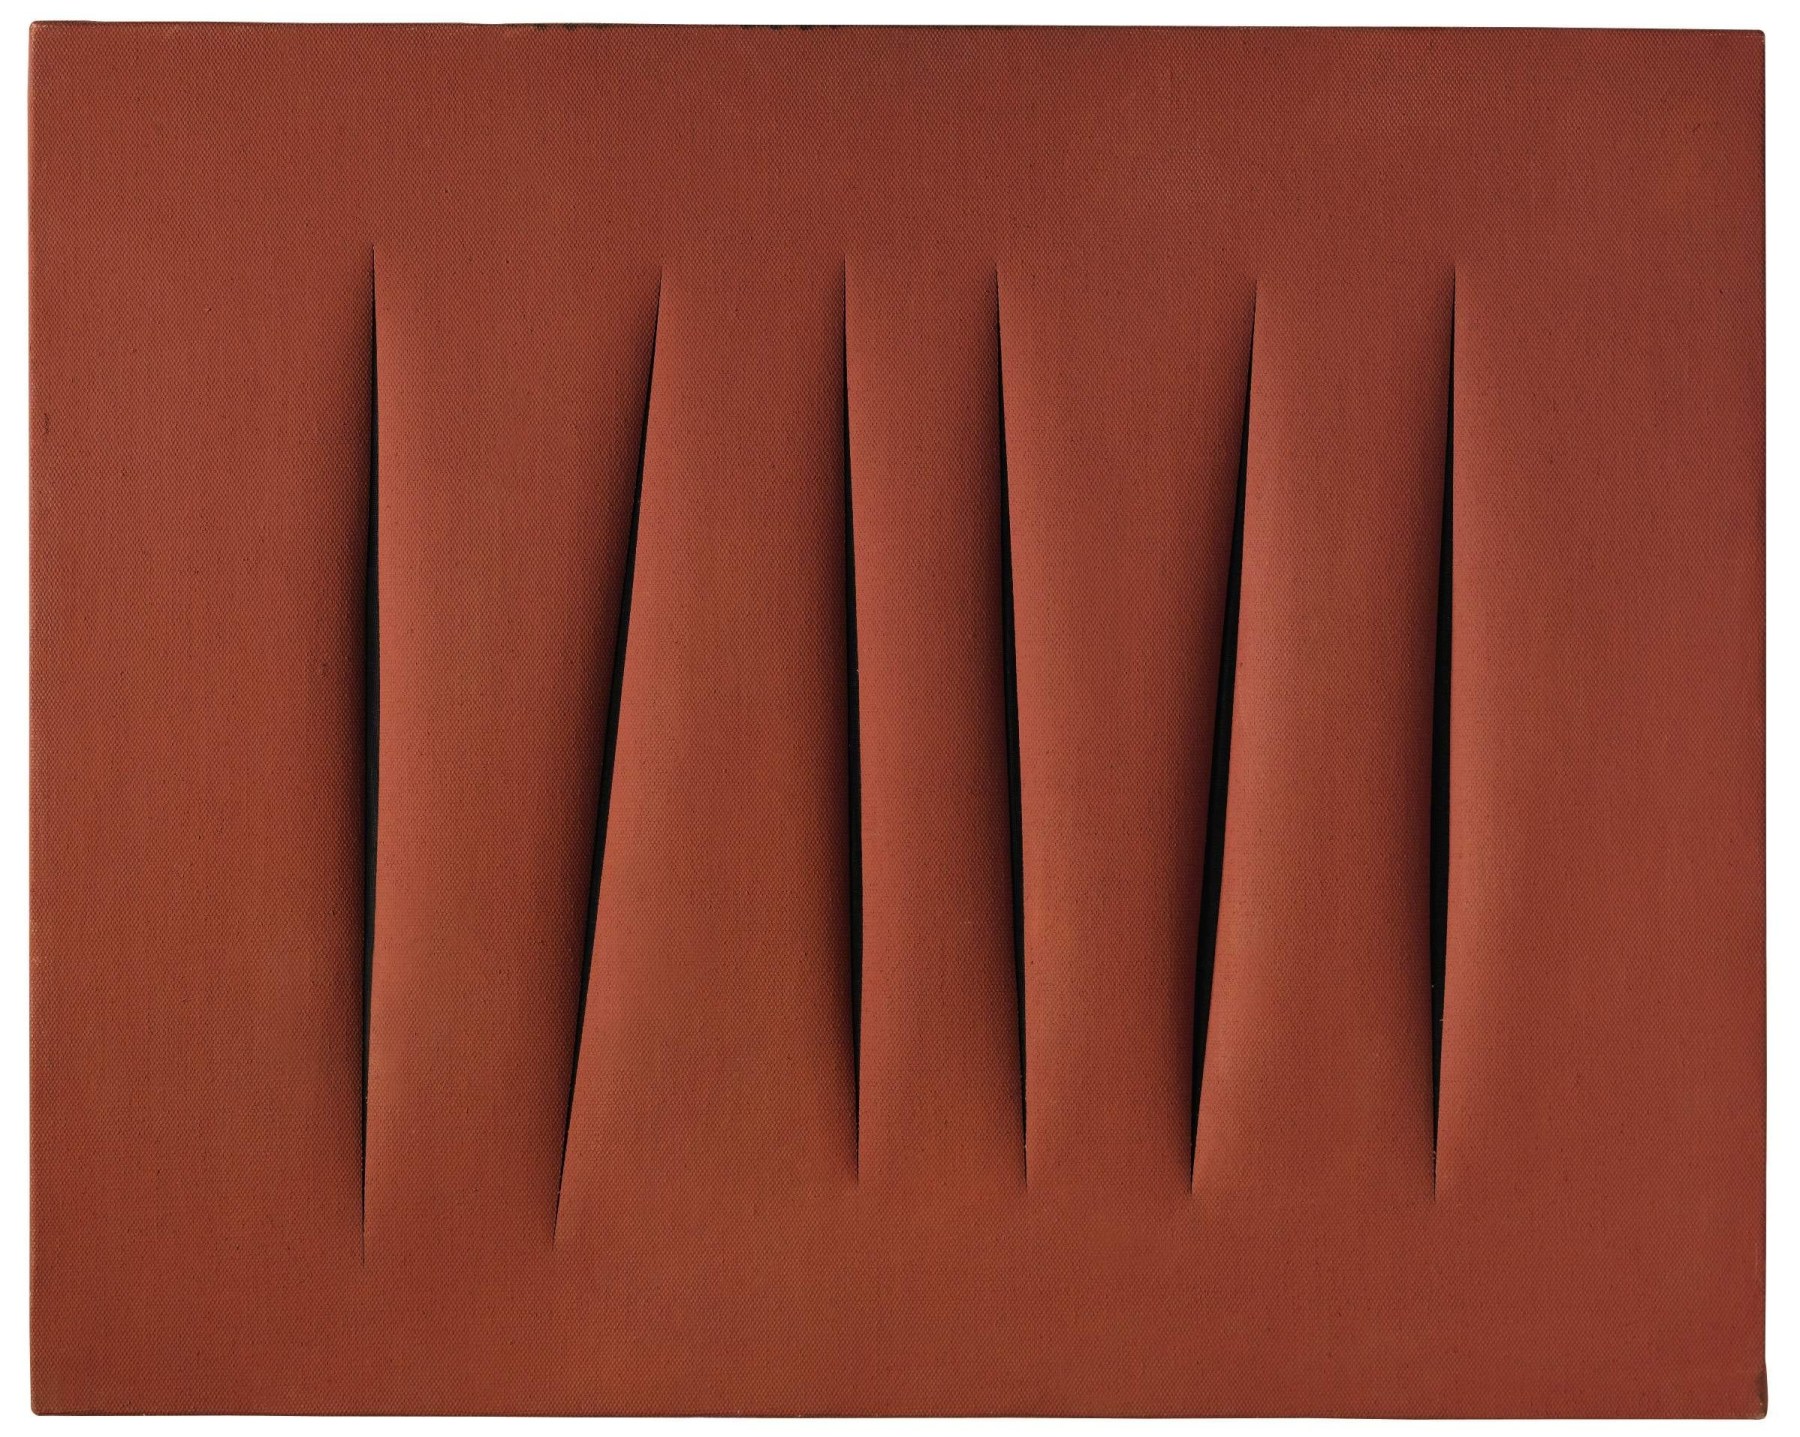 About the Artwork Lucio Fontana. Concetto Spaziale, Attese (1 + 1   3 Ao) (60 T 122). 1960. Latex Paint on Canvas. 65 X 81 Cm.  by Lucio Fontana